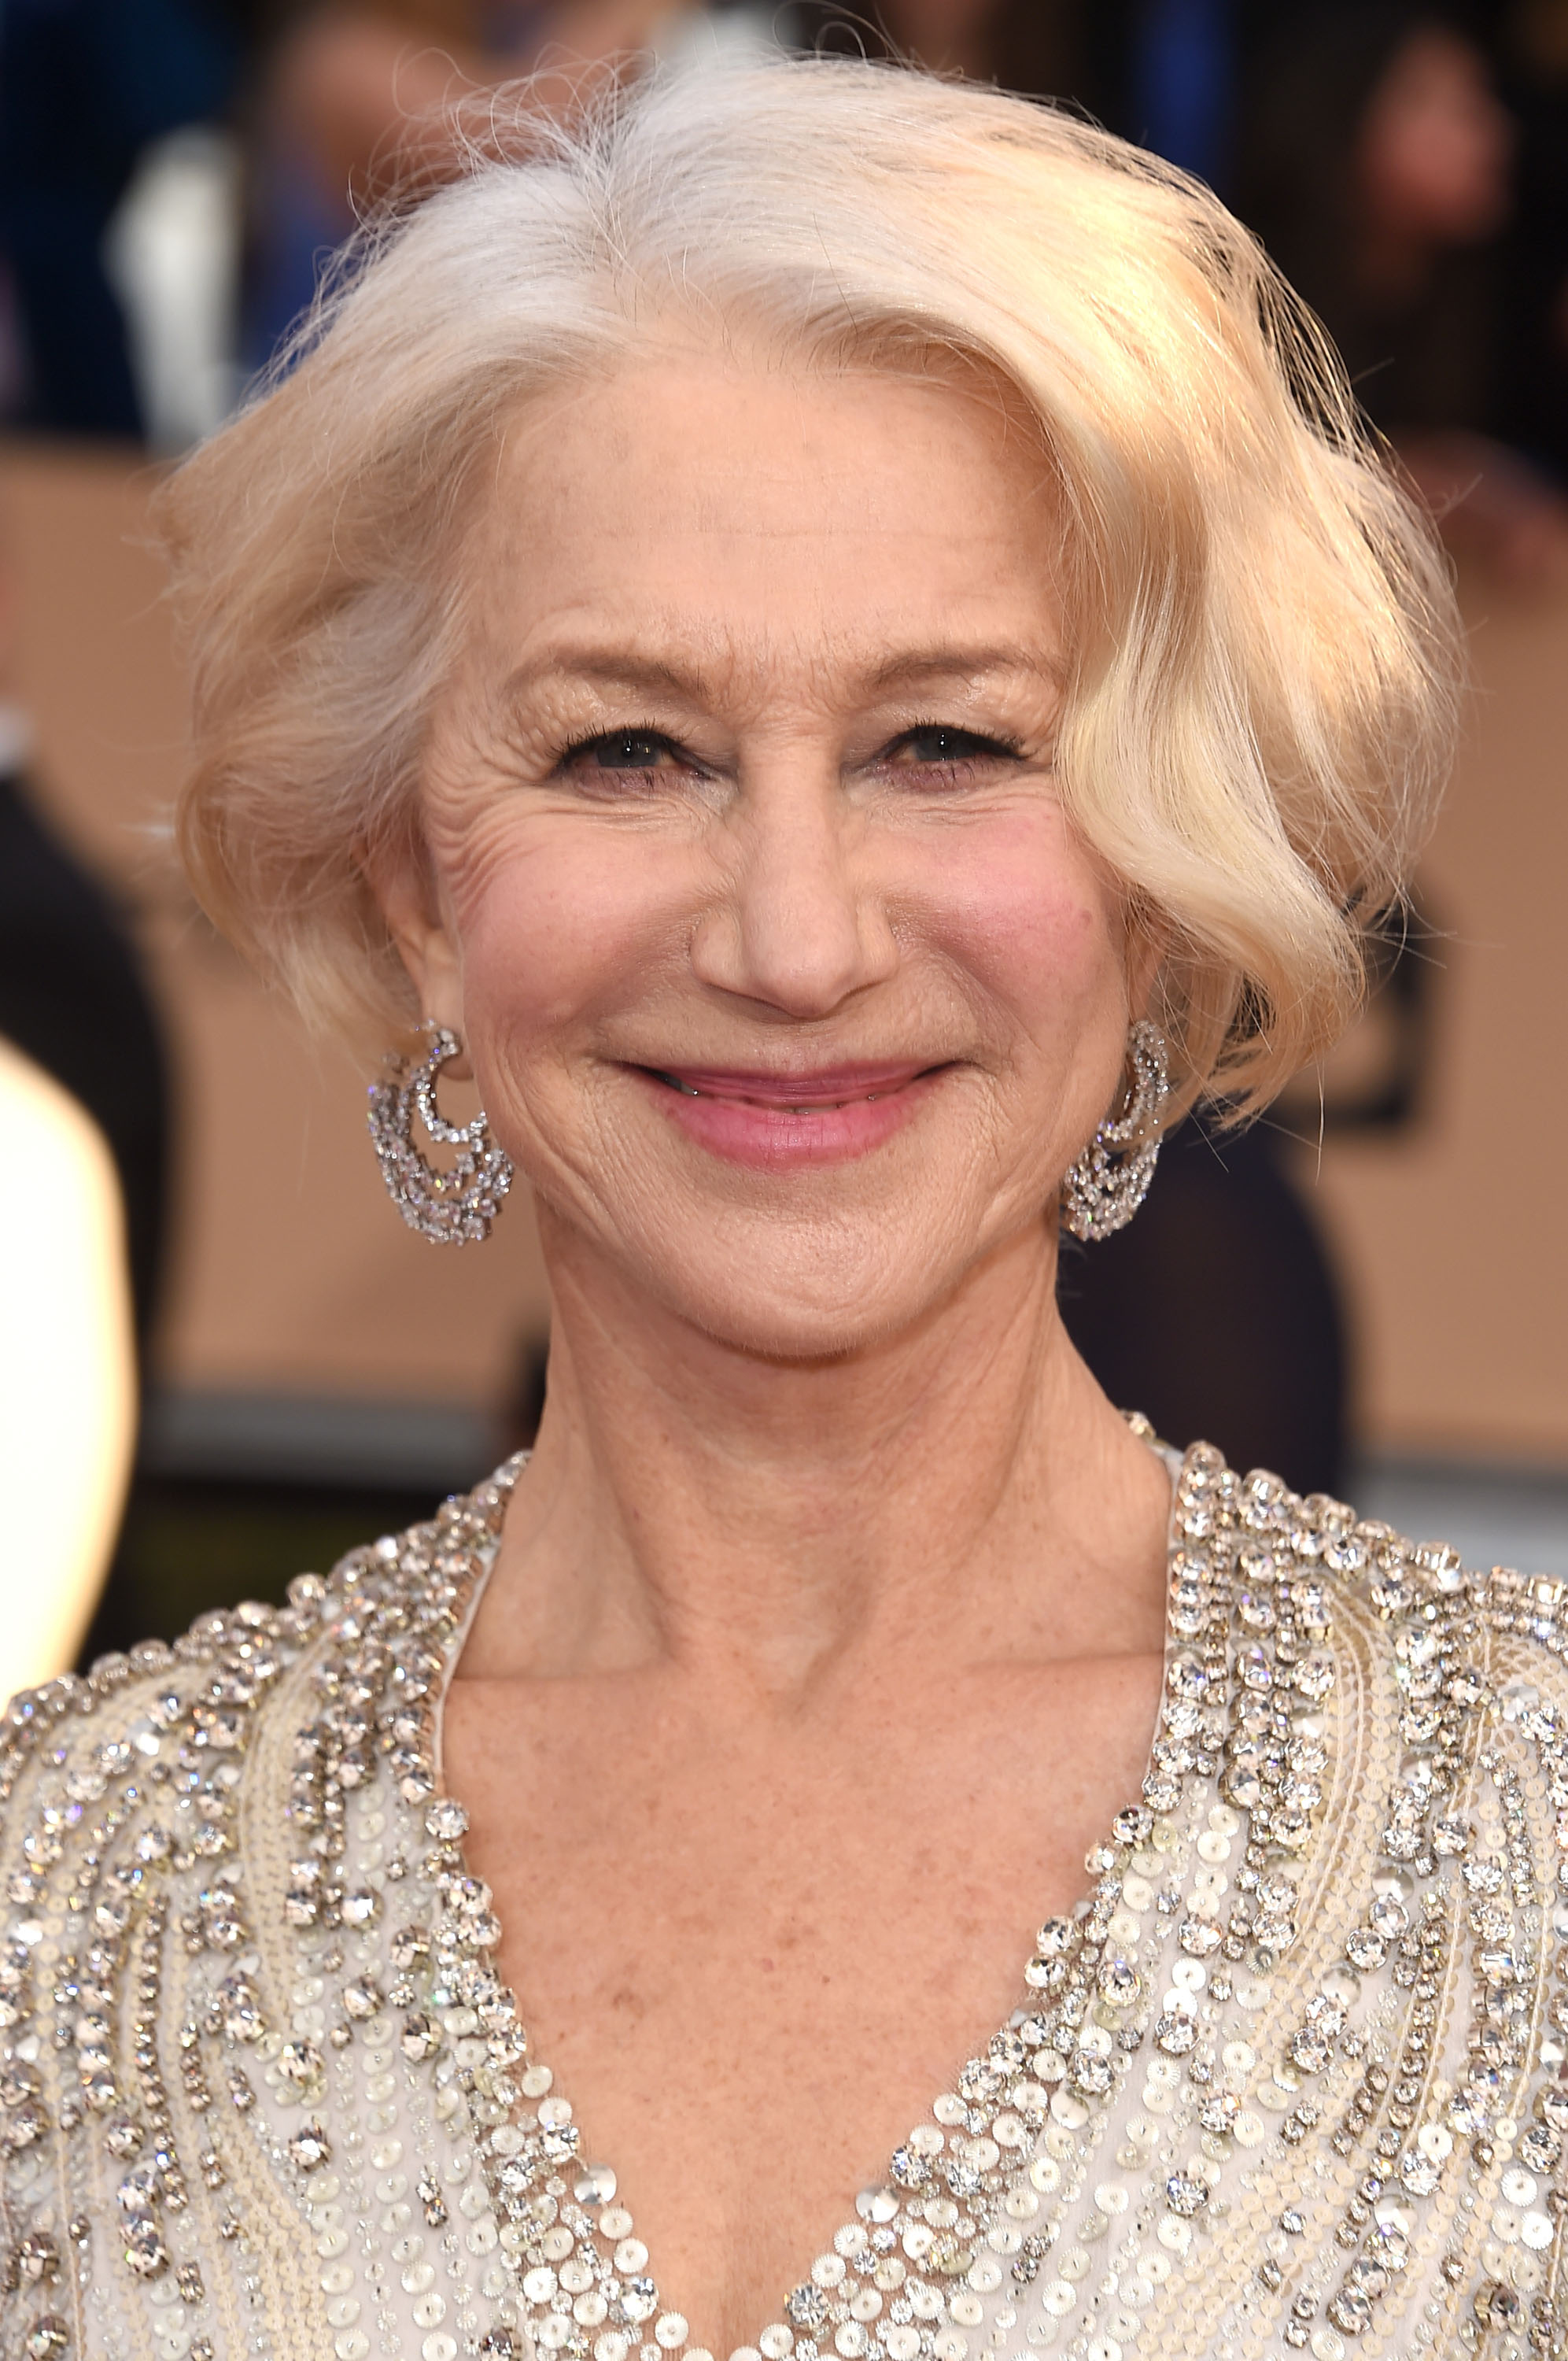 Helen Mirren arrives at the 22nd Annual Screen Actors Guild Awards at The Shrine Auditorium on January 30, 2016 in Los Angeles, California.